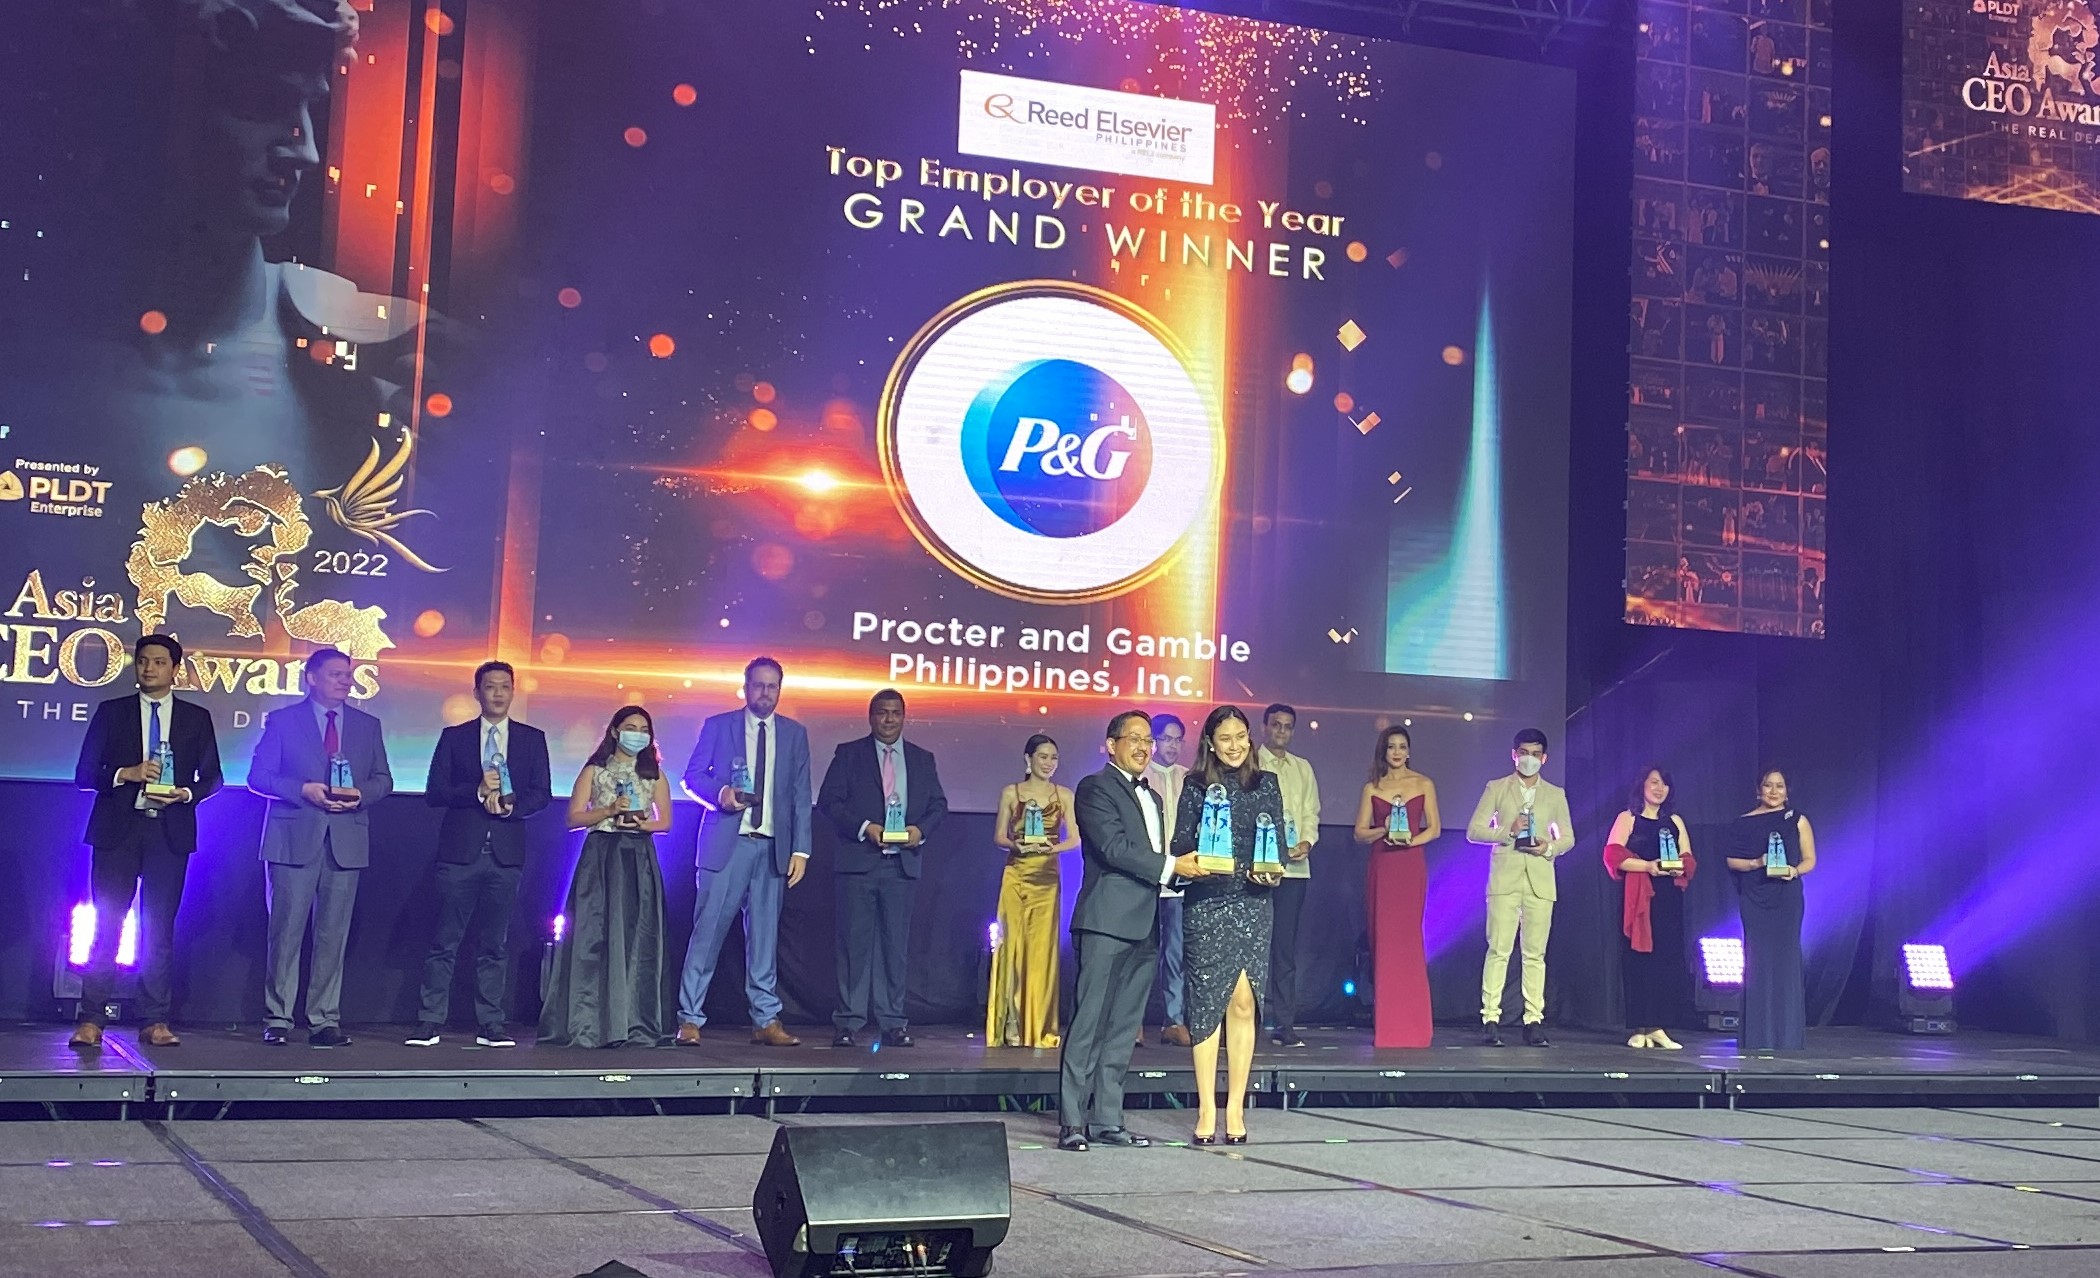 P&G Philippines takes home the Top Employer of The Year Grand Winner at the 2022 Asia CEO Awards